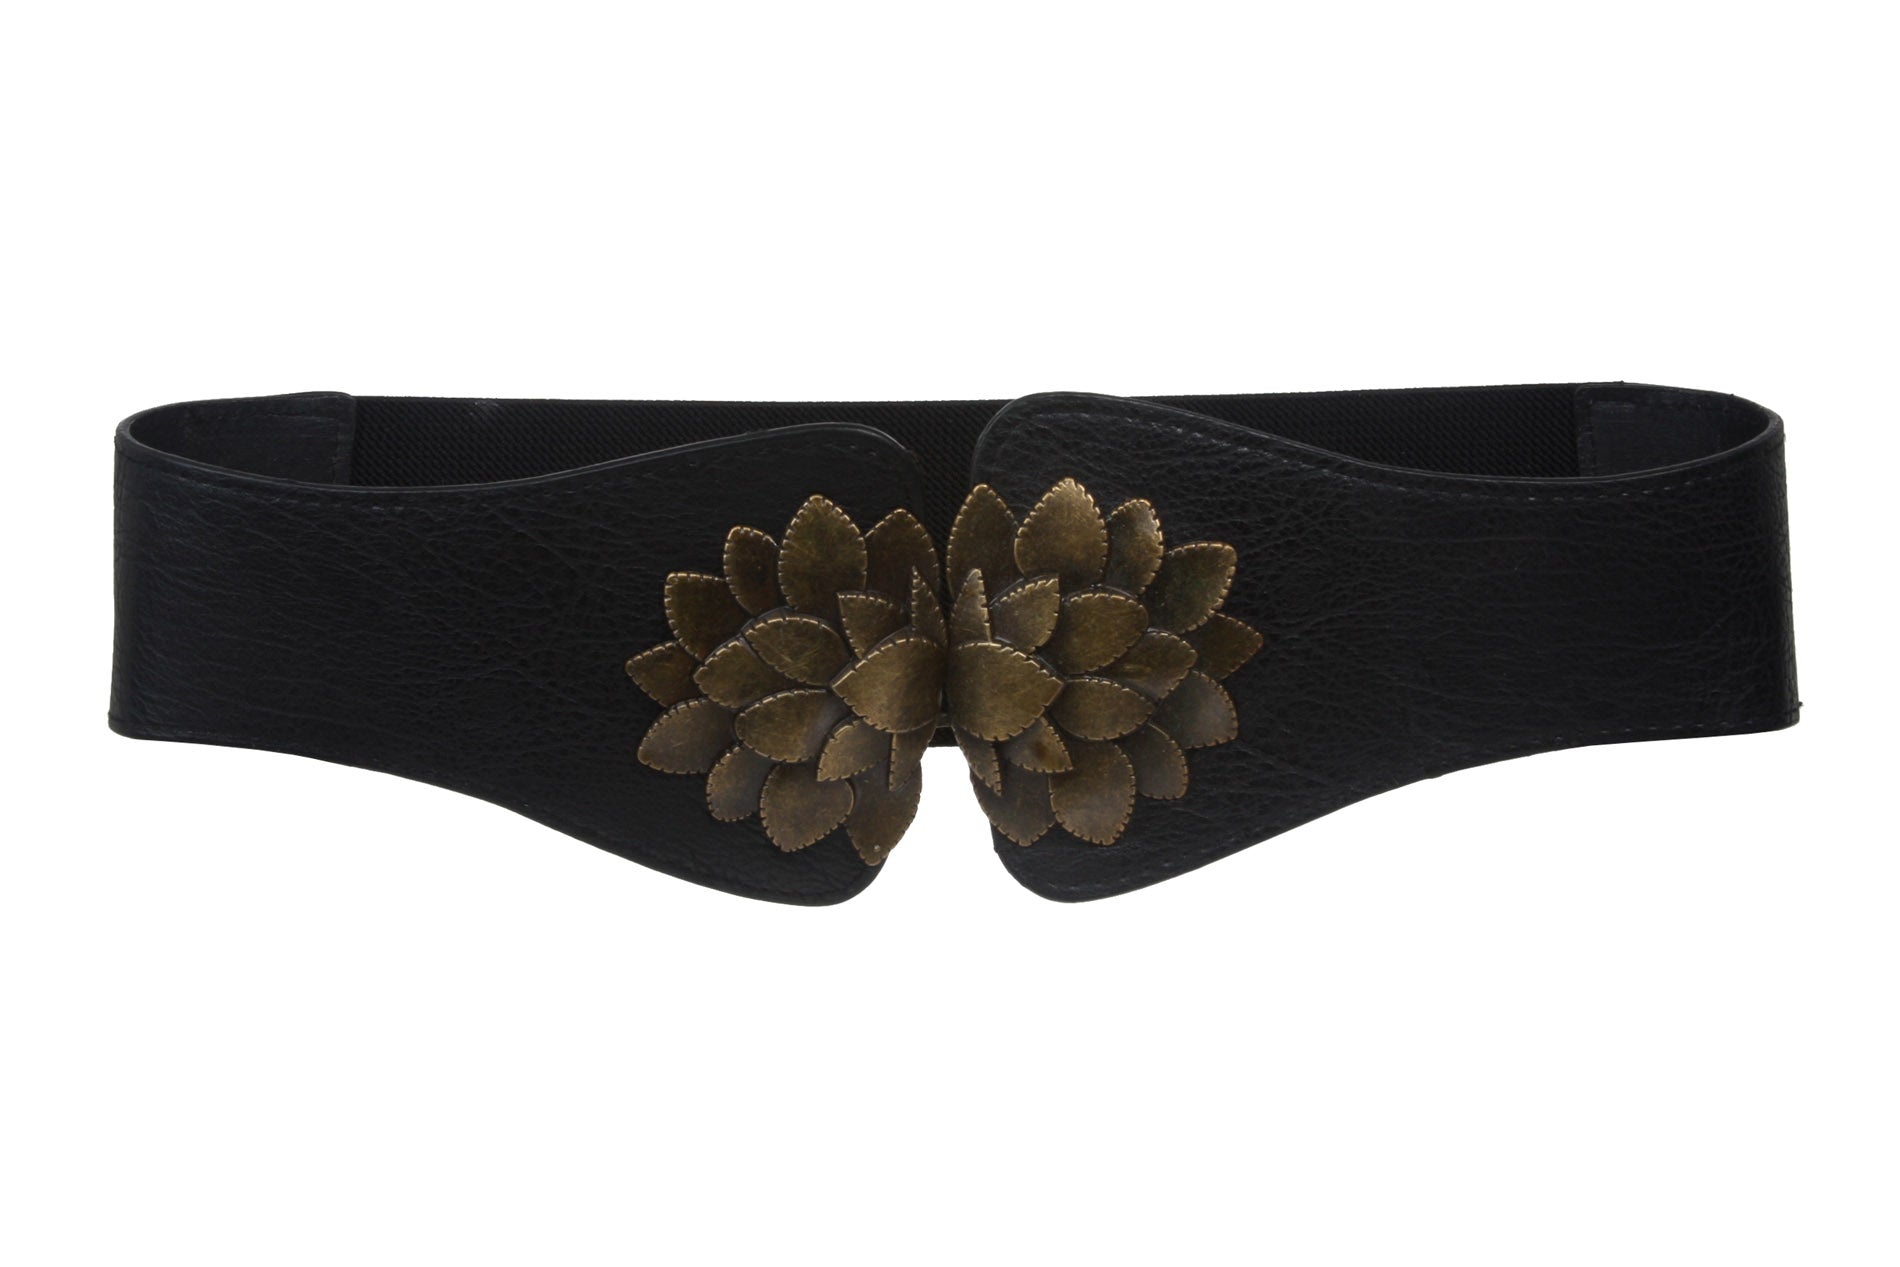 Ladies 4" Wide High Waist Floral Shape Stretch Belt With Metal Hook Buckle Size: One